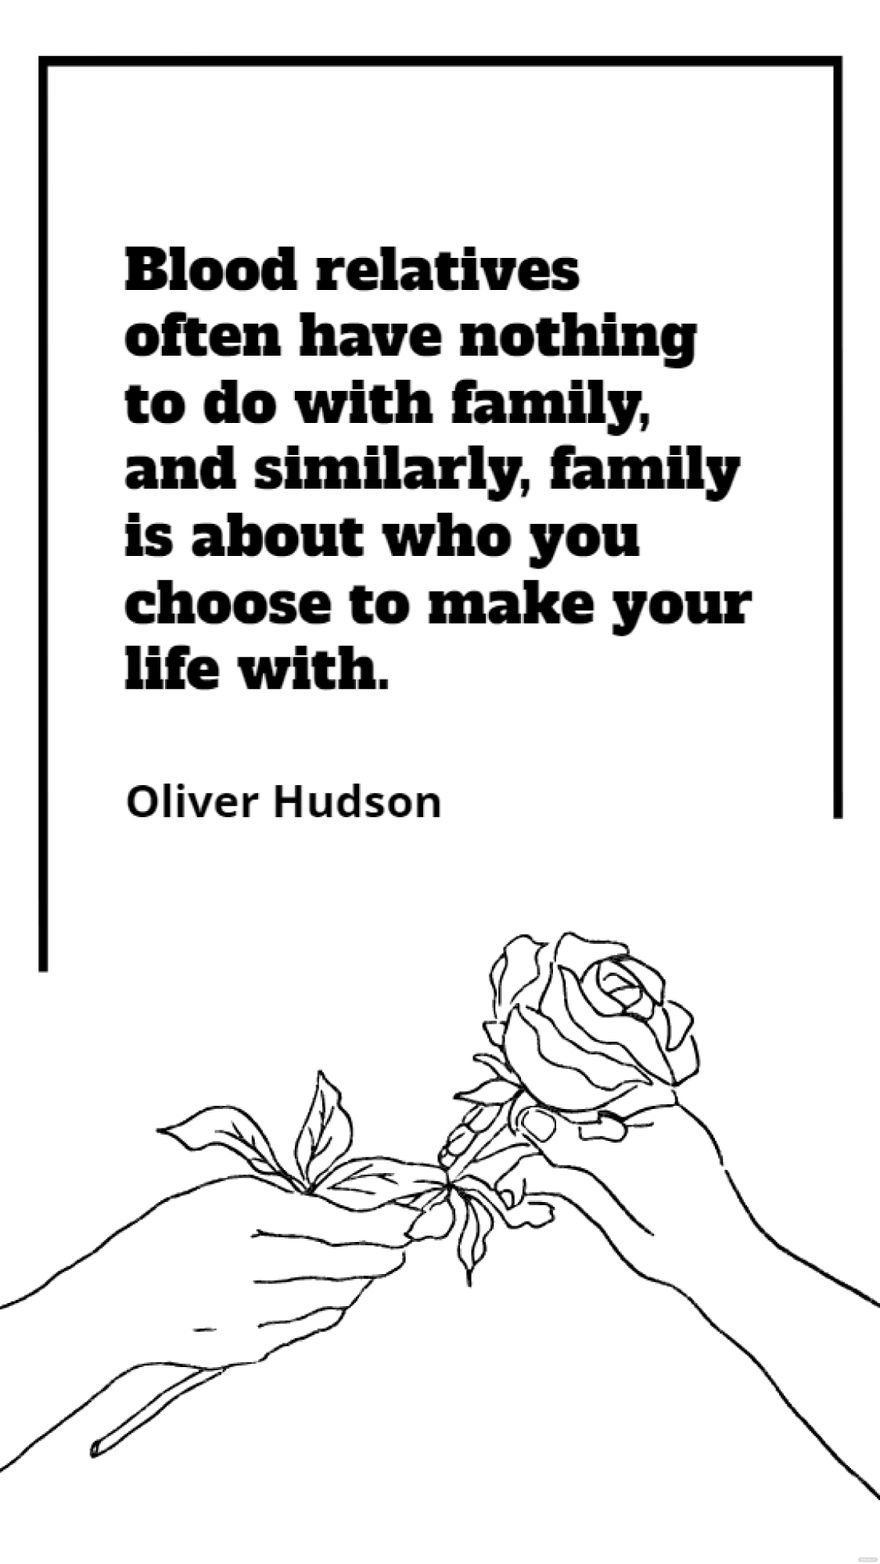 Oliver Hudson - Blood relatives often have nothing to do with family, and similarly, family is about who you choose to make your life with.